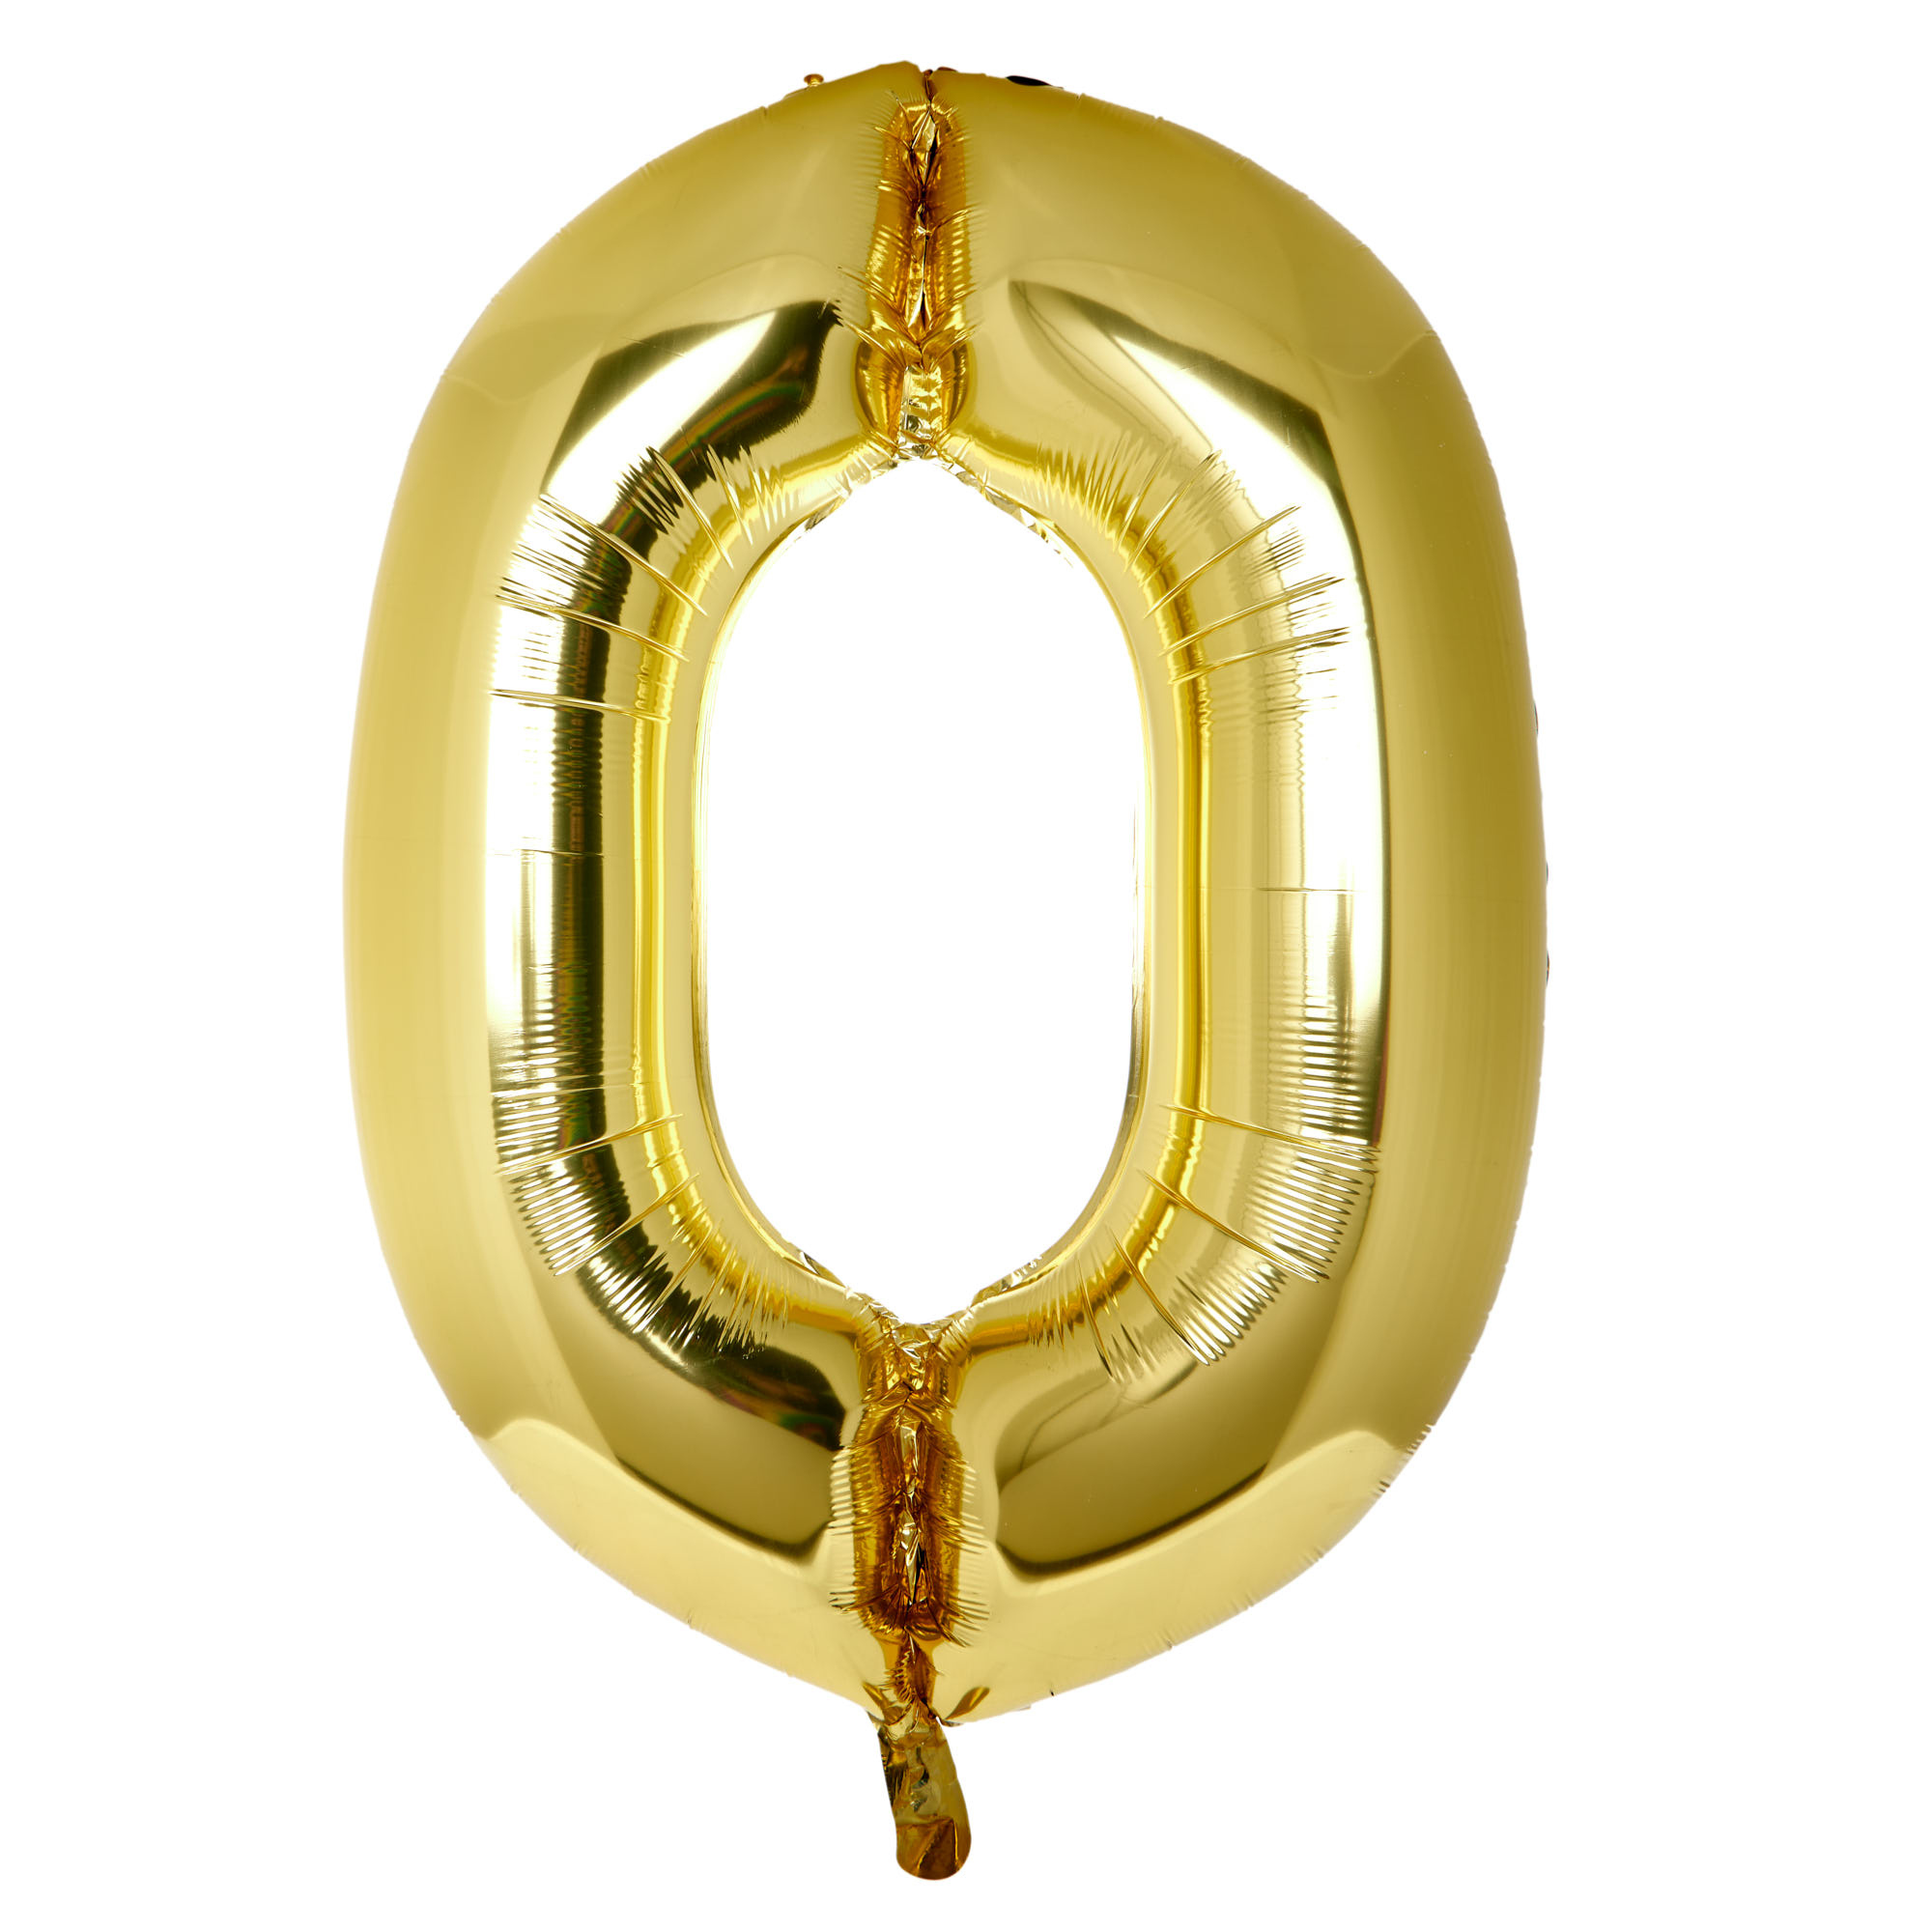 Large 34-Inch Gold Number 0 Foil Helium Balloon (Uninflated) 